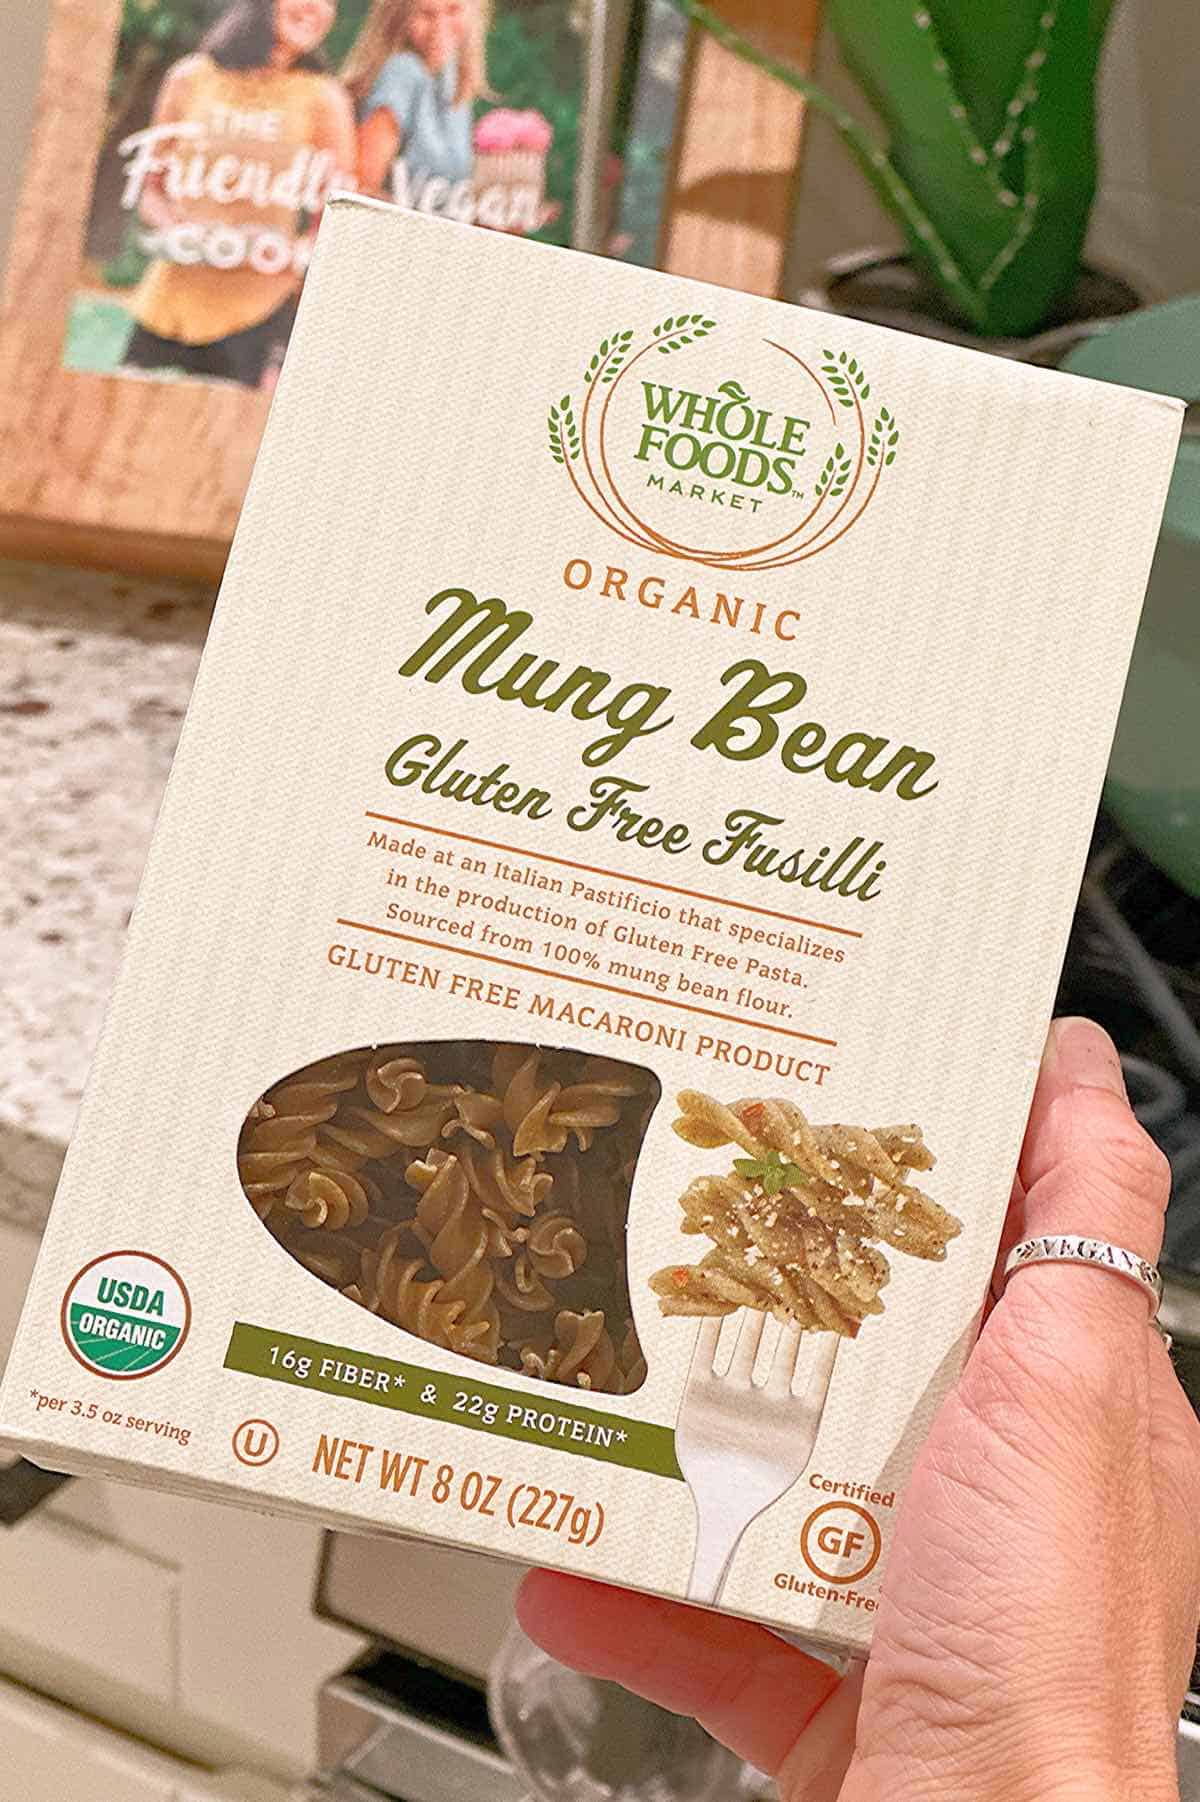 A box of mung bean pasta packed with protein from Whole Foods.